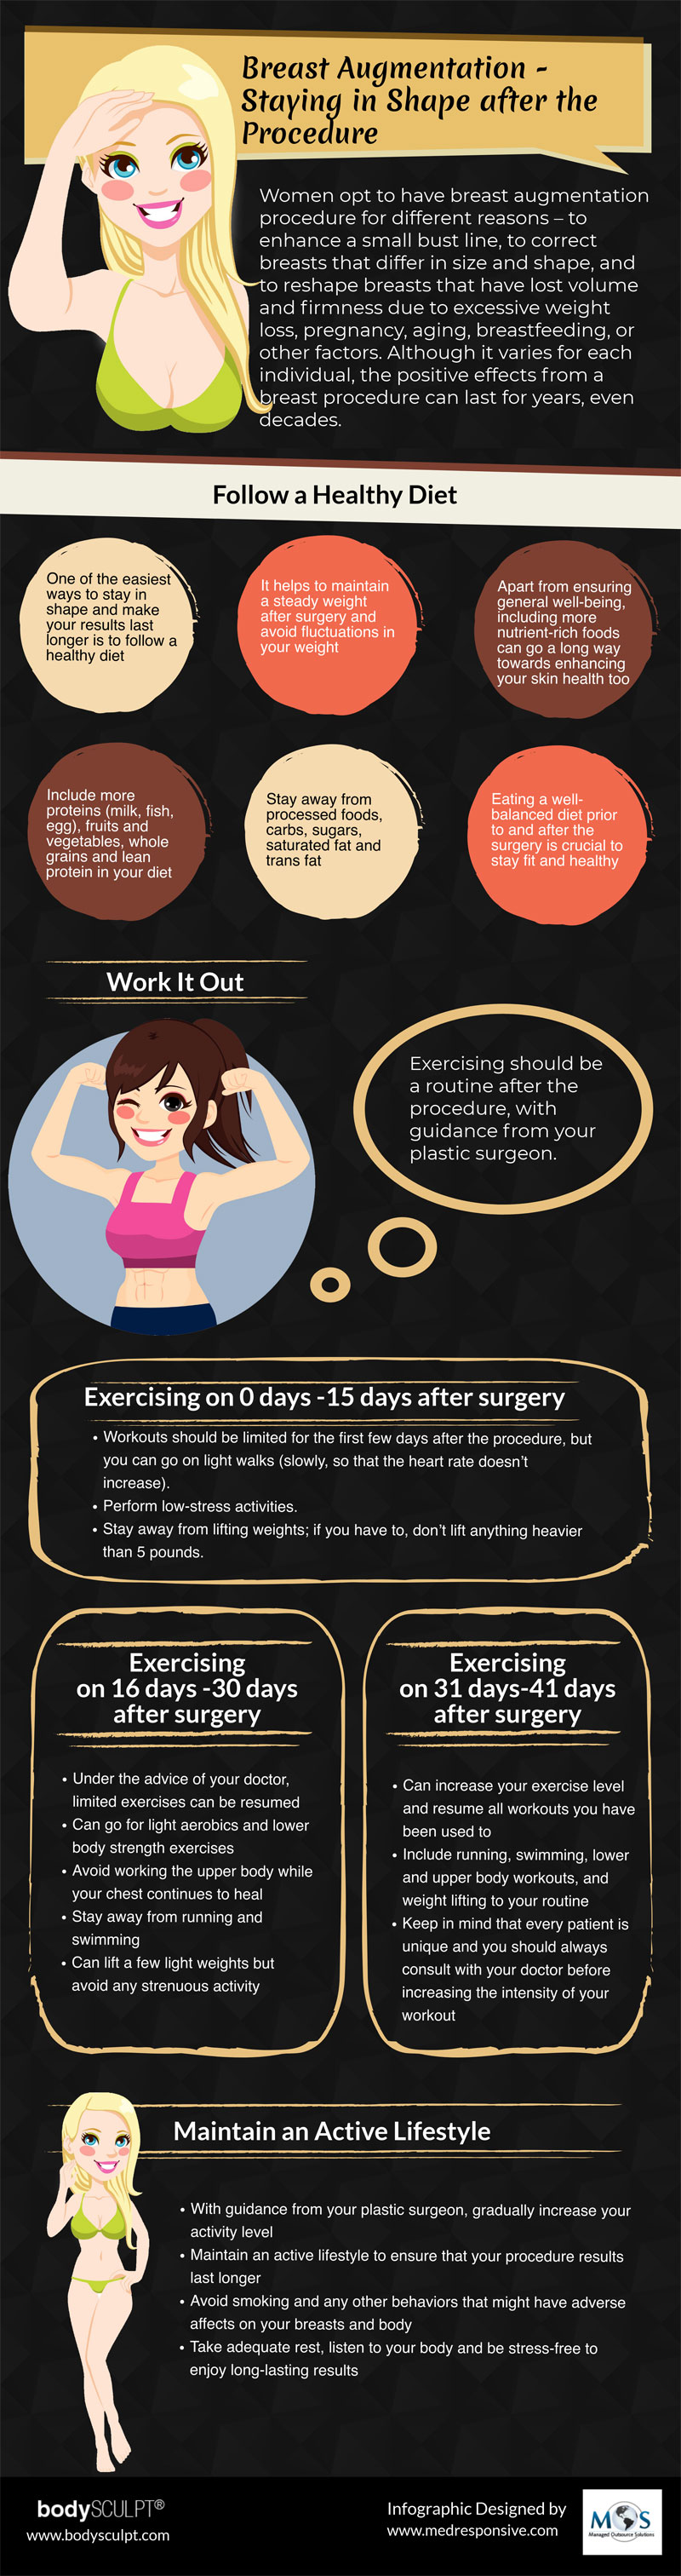 Advice for Exercising After a Breast Augmentation